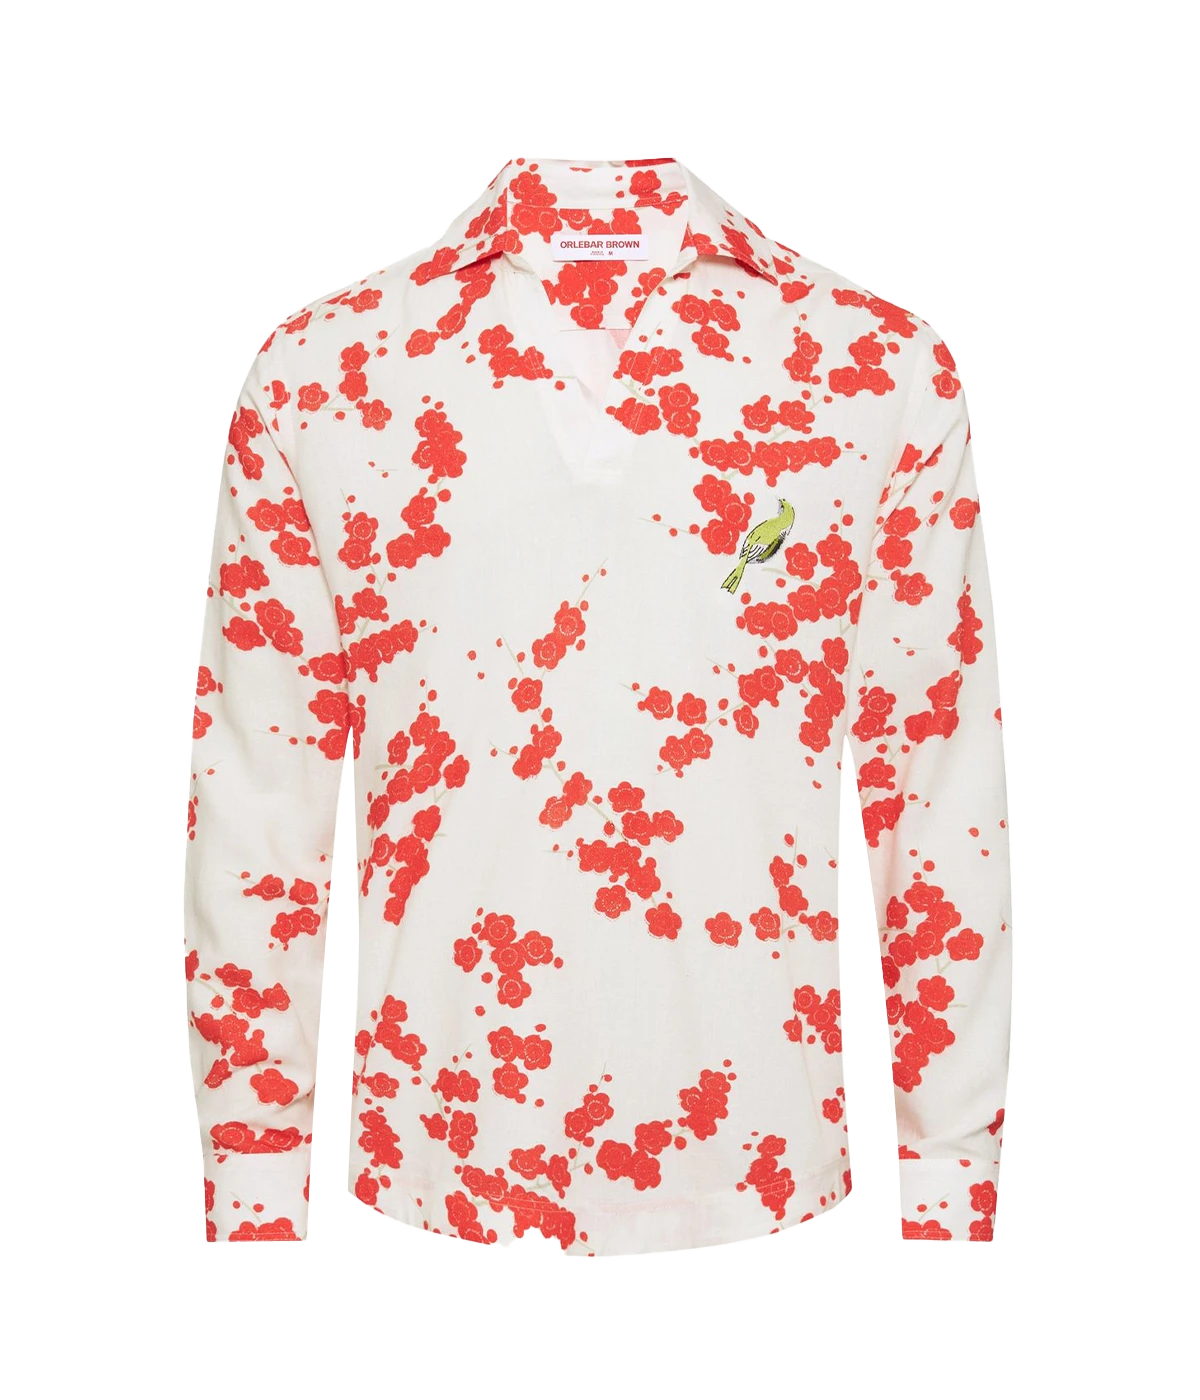 Ridley Plum Blossom T-Shirt in Red